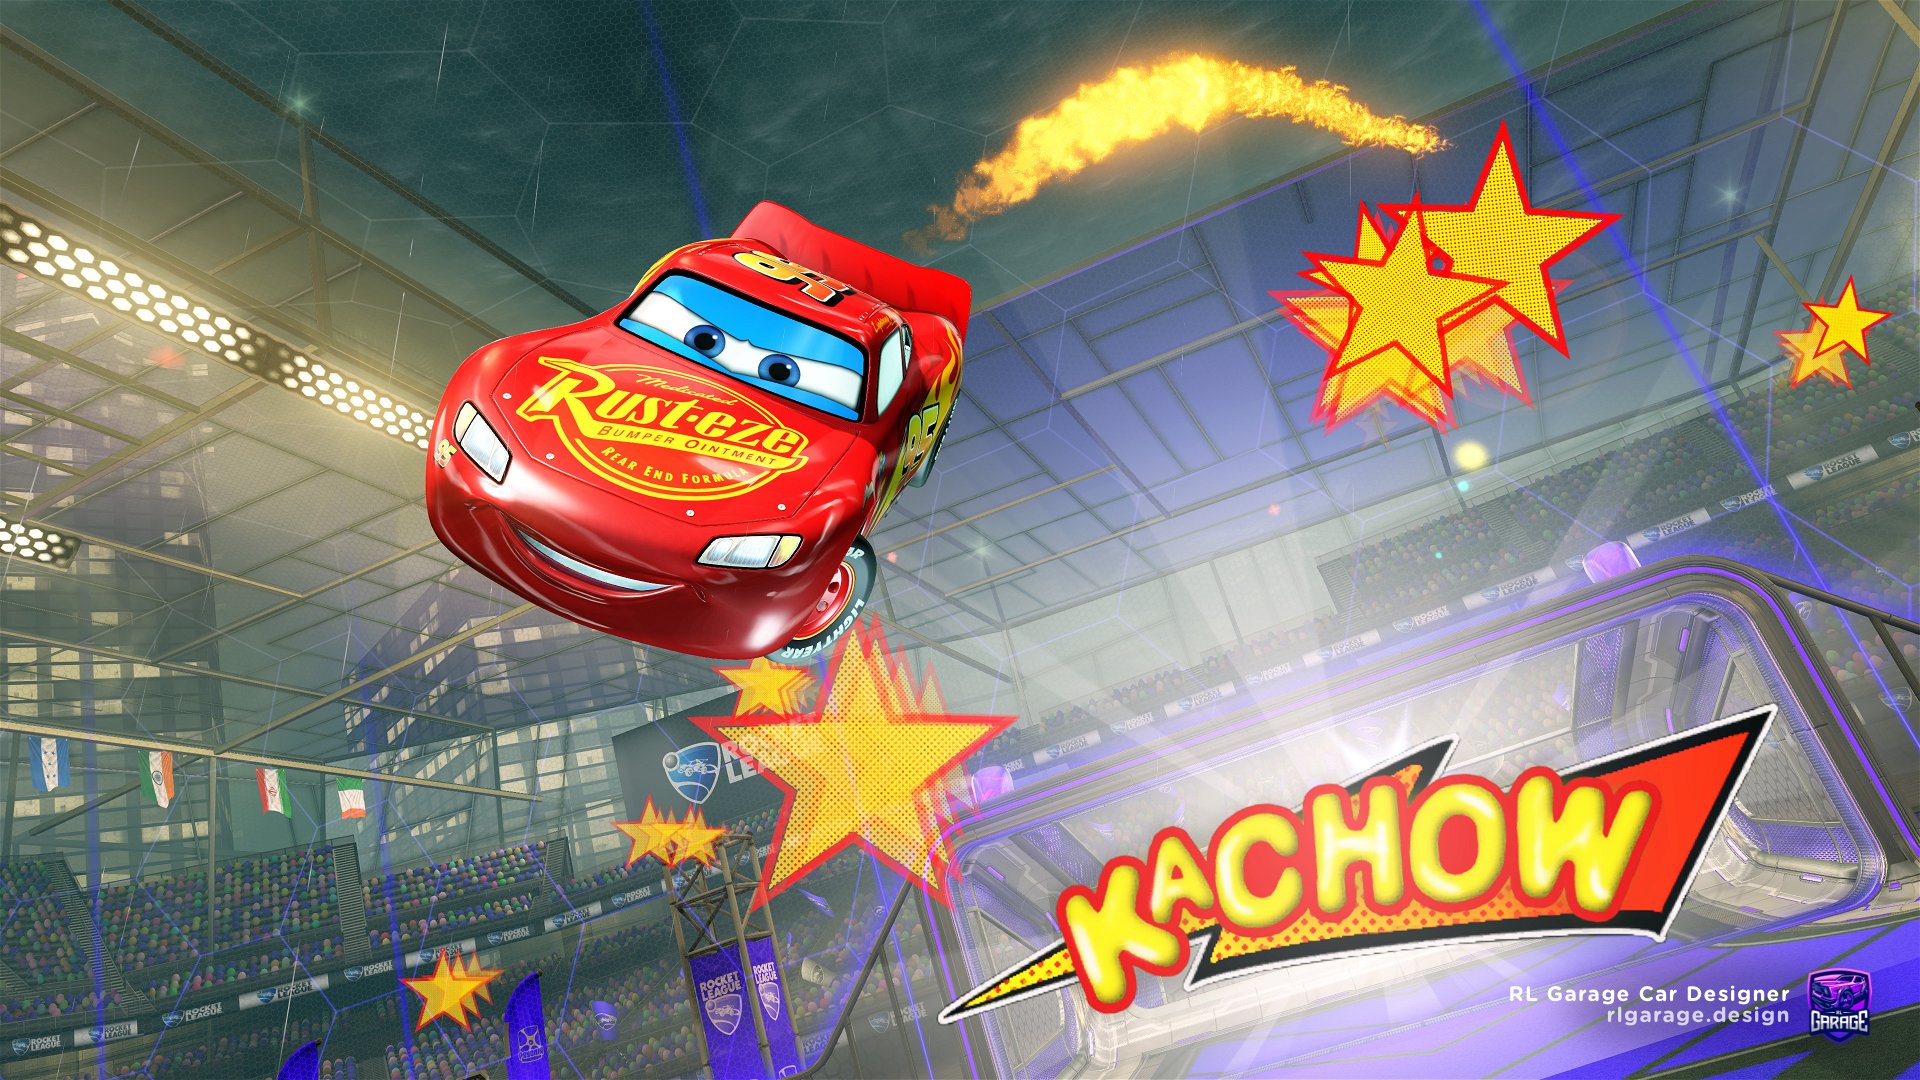 All new items inspired by Disney•Pixar's Lightning McQueen are now  available, including the Car Body, Decals, Ka-chow! Goal Explosion &…